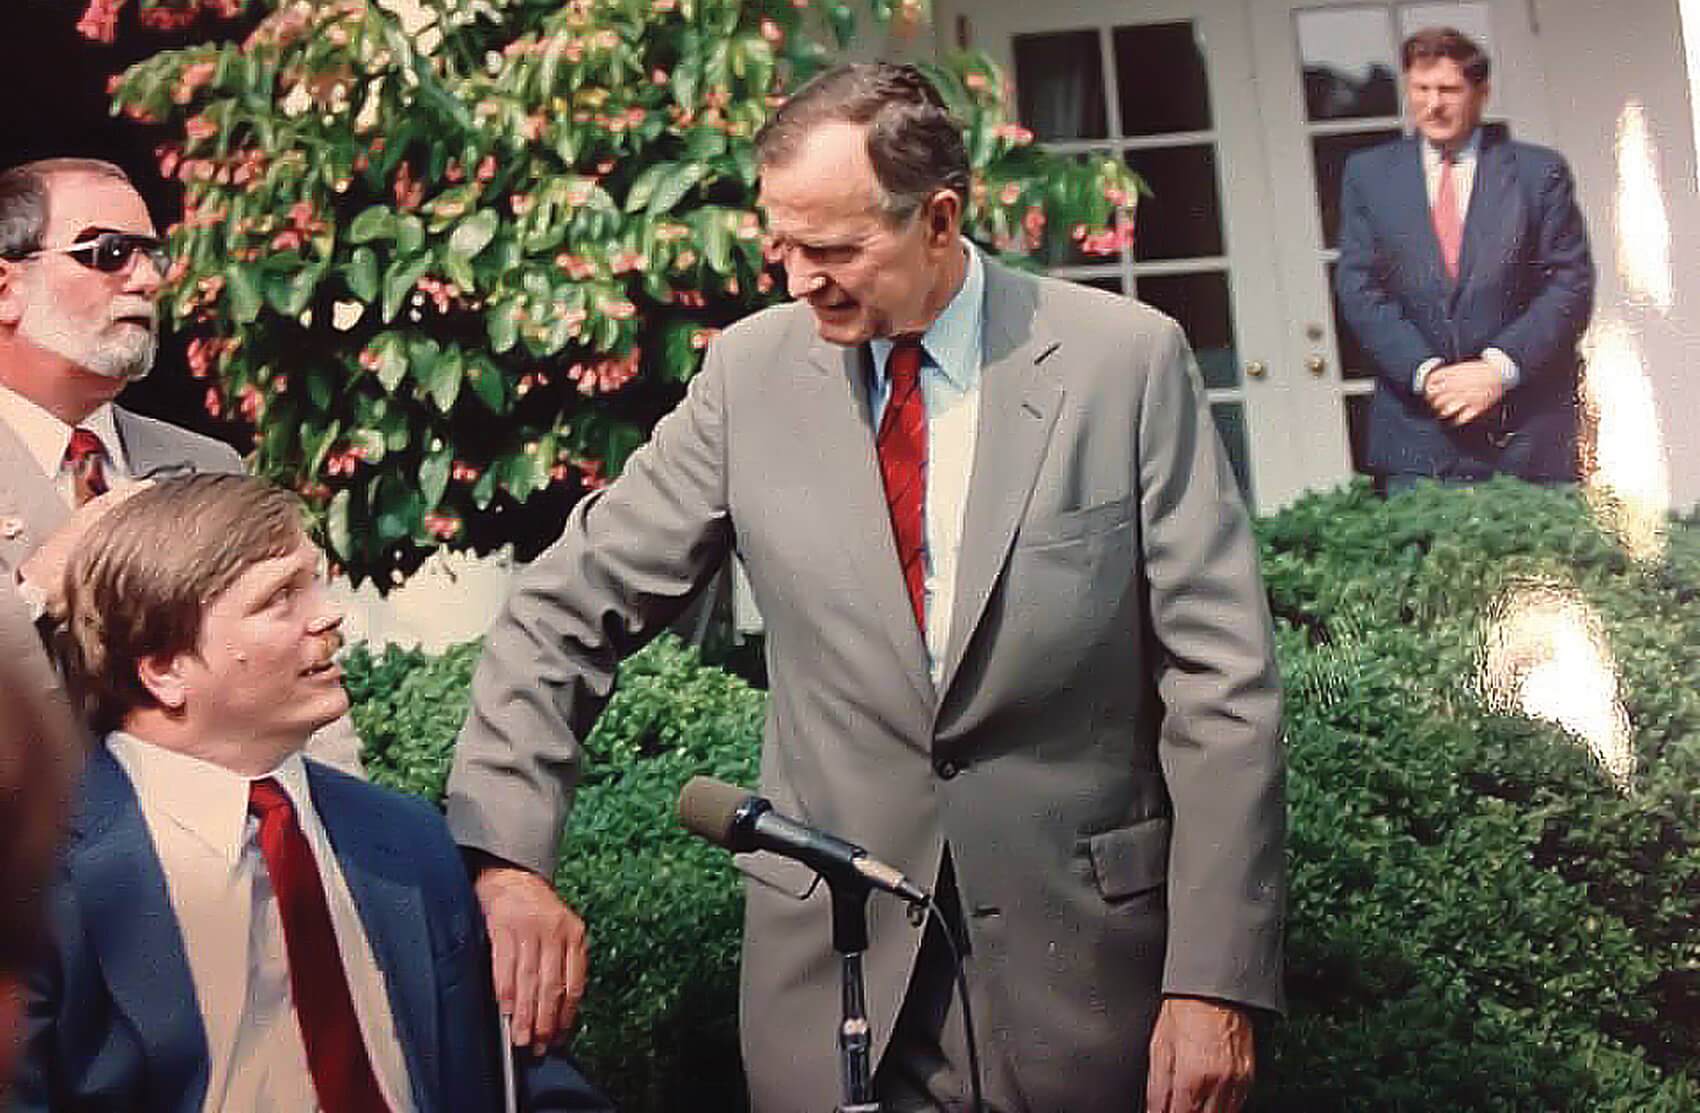 In 1991, Frieden and President Bush celebrate the first anniversary of the passage of the Americans with Disabilities Act at the White House Rose Garden. (Credit: Lex Frieden)